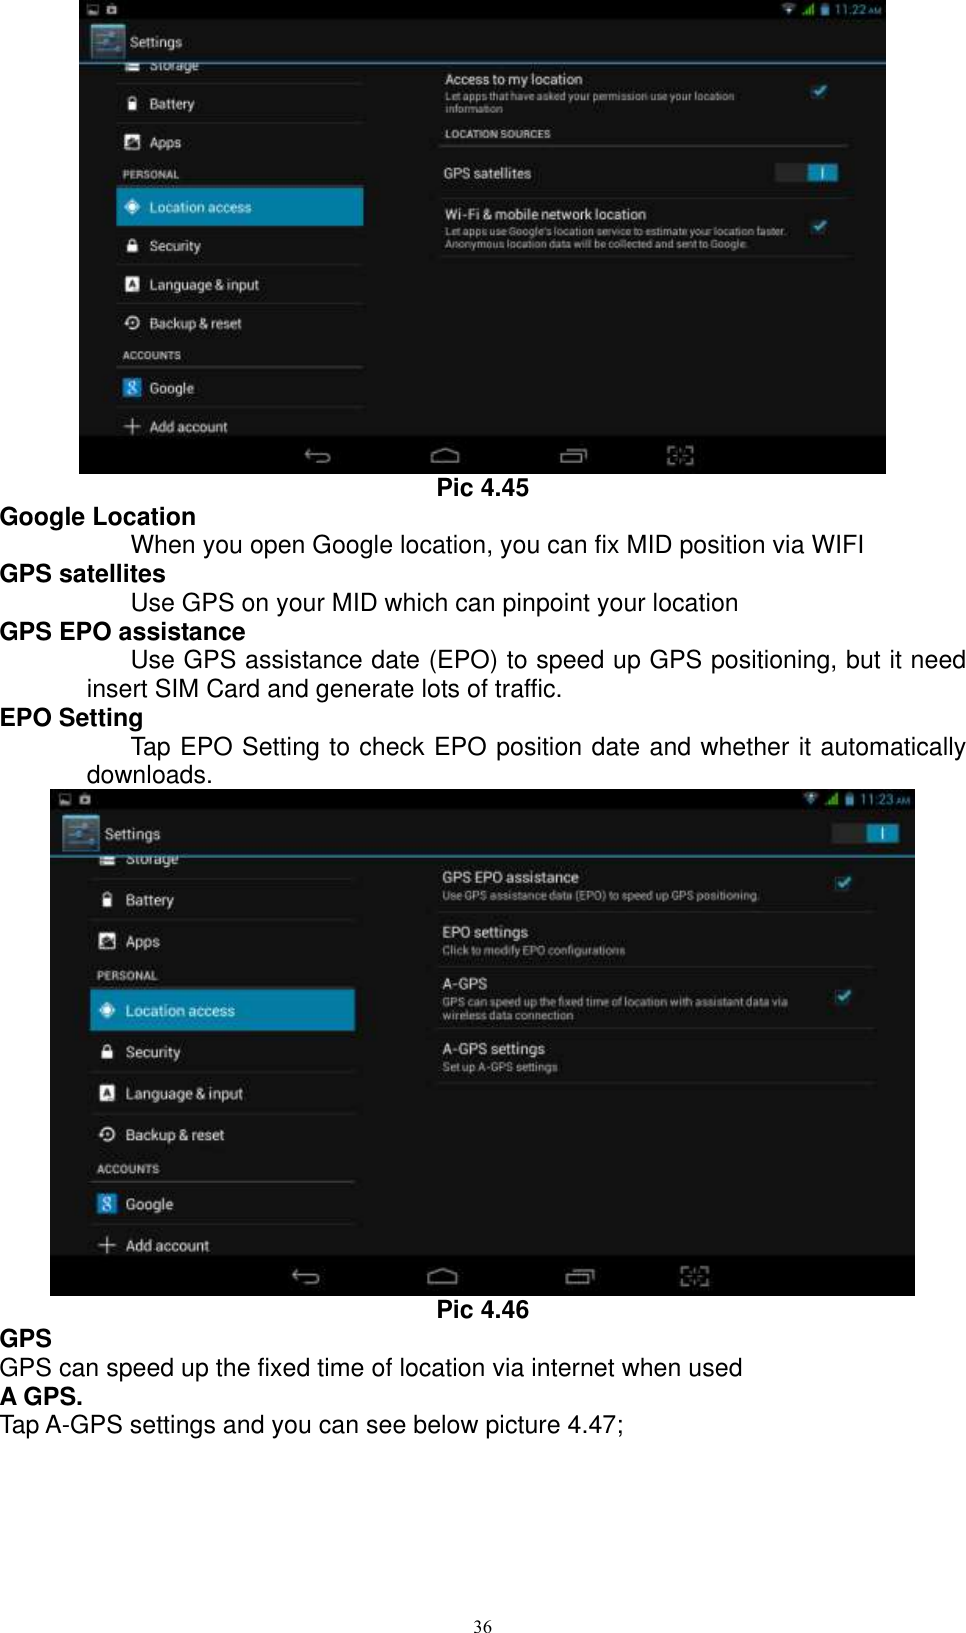      36  Pic 4.45 Google Location When you open Google location, you can fix MID position via WIFI GPS satellites Use GPS on your MID which can pinpoint your location GPS EPO assistance Use GPS assistance date (EPO) to speed up GPS positioning, but it need insert SIM Card and generate lots of traffic. EPO Setting Tap EPO Setting to check EPO position date and whether it automatically downloads.    Pic 4.46 GPS GPS can speed up the fixed time of location via internet when used A GPS. Tap A-GPS settings and you can see below picture 4.47; 